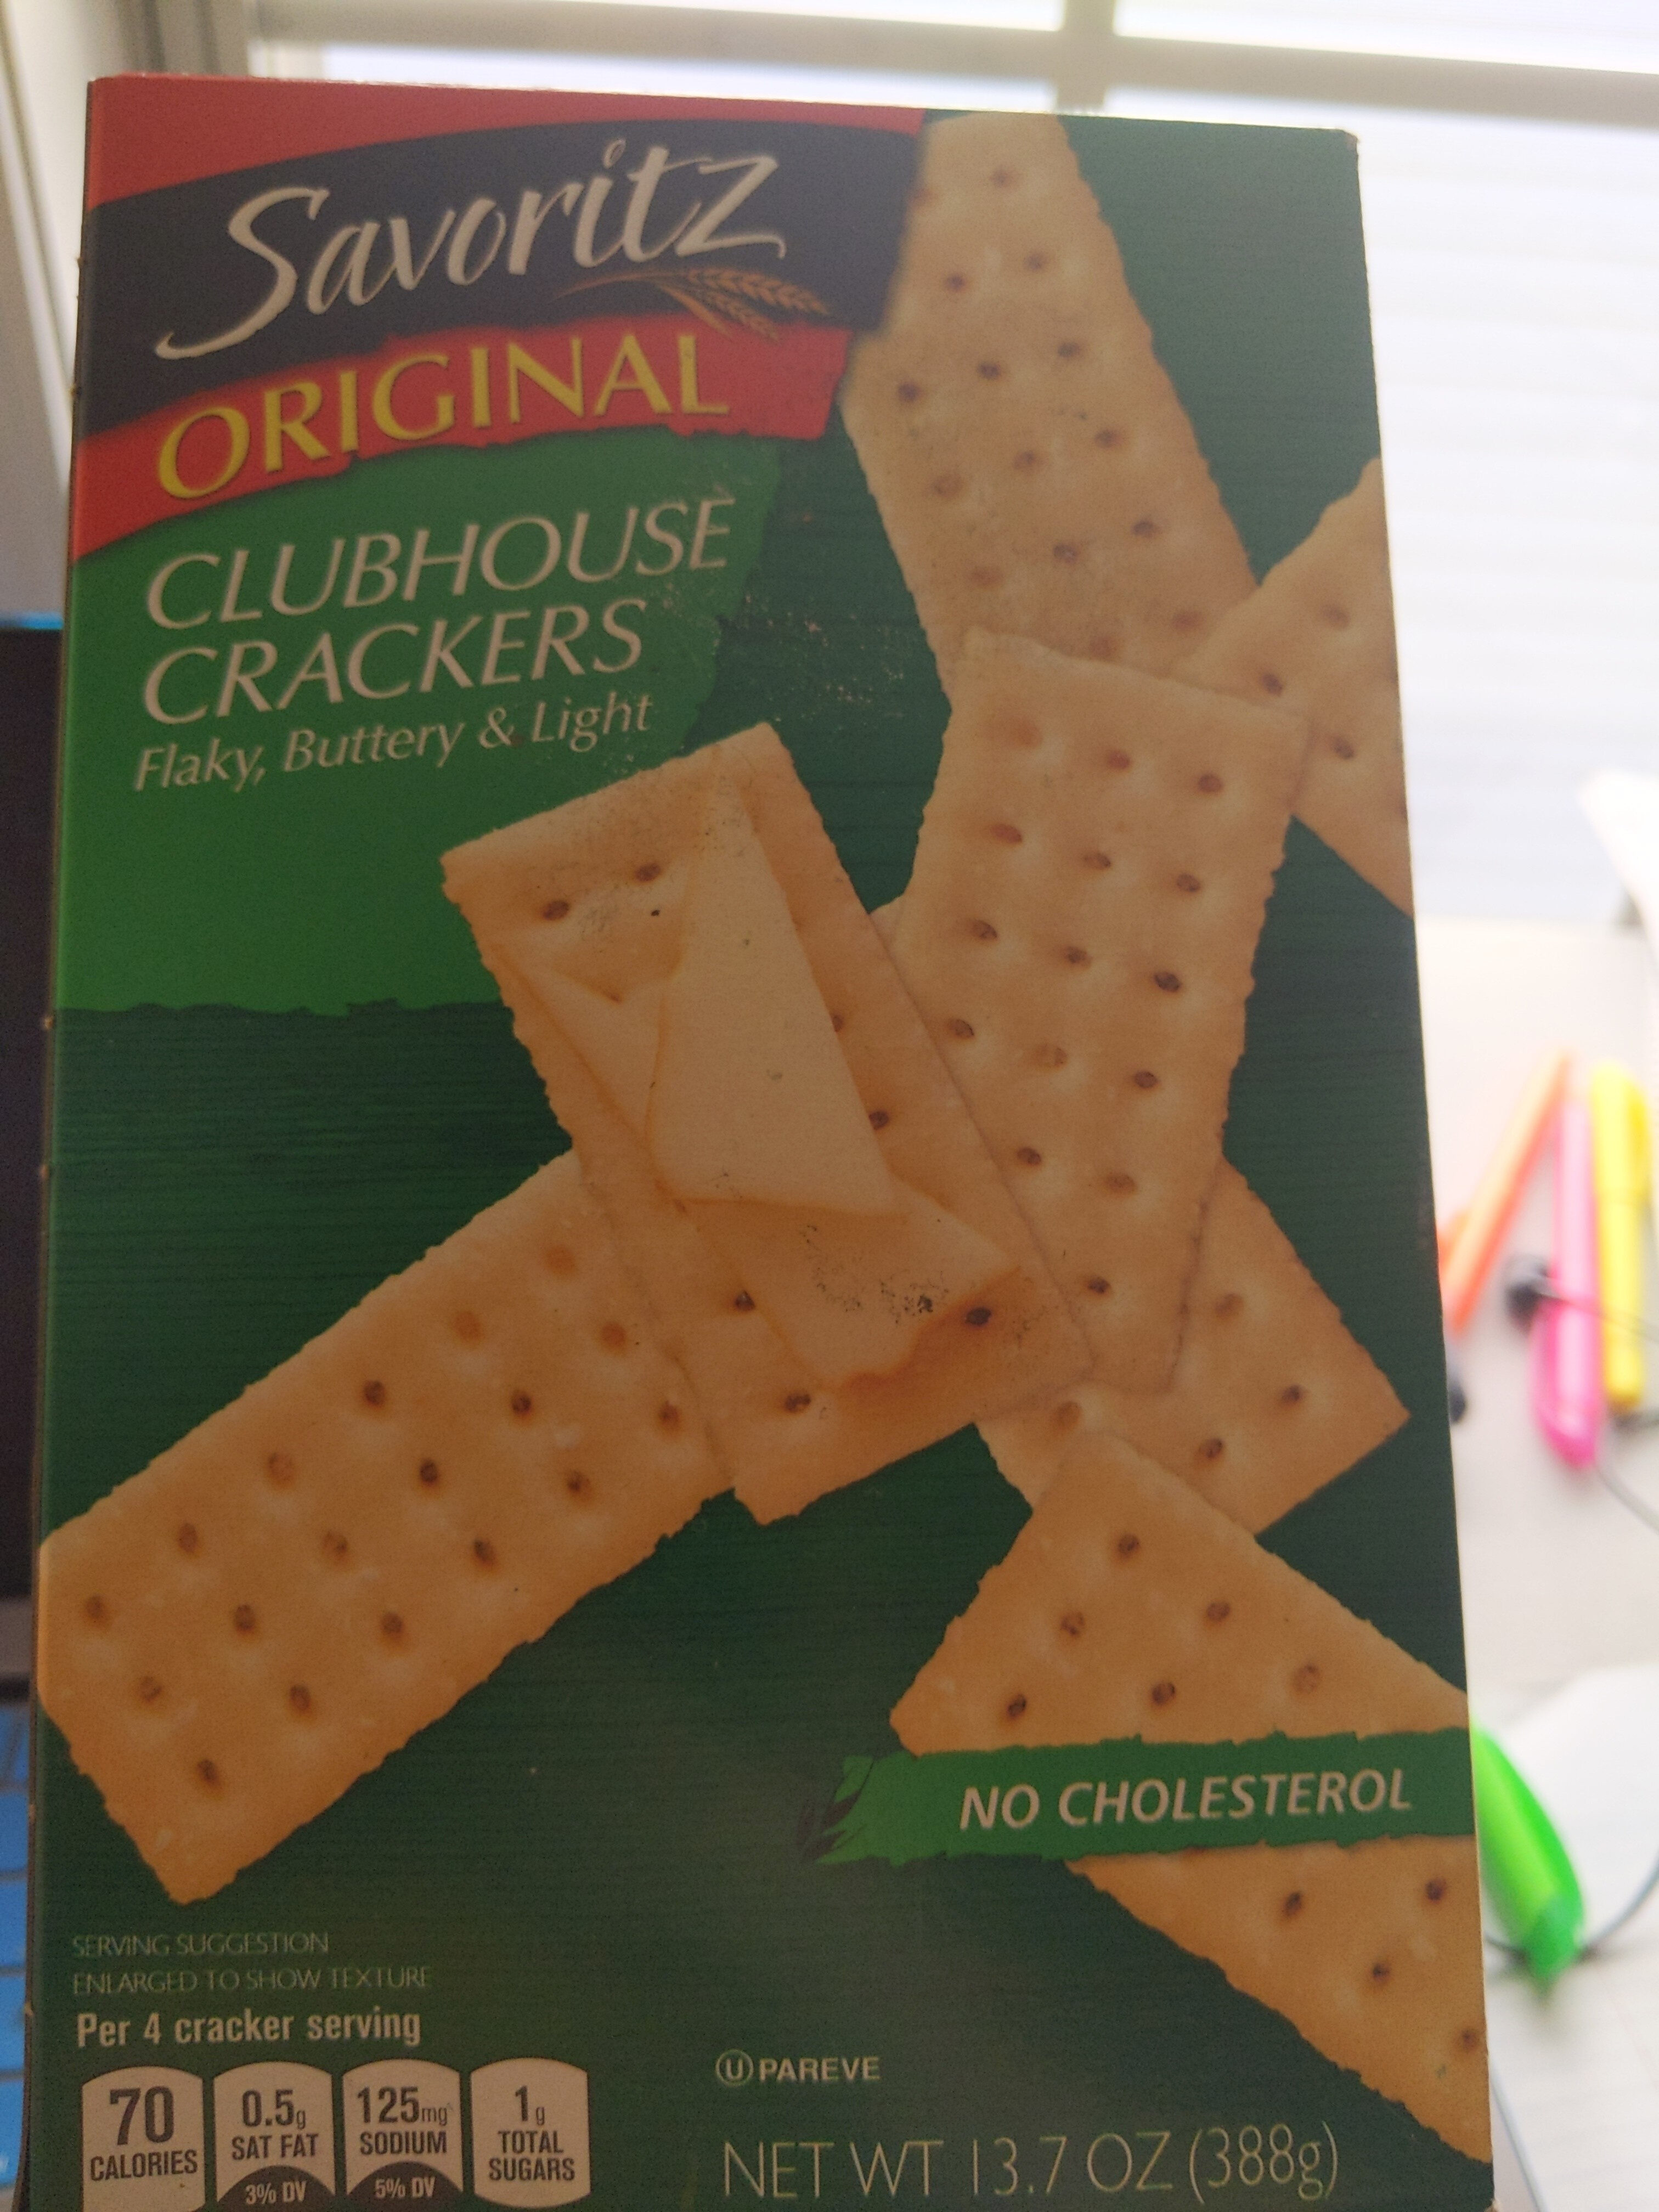 clubhouse crackers - Product - en